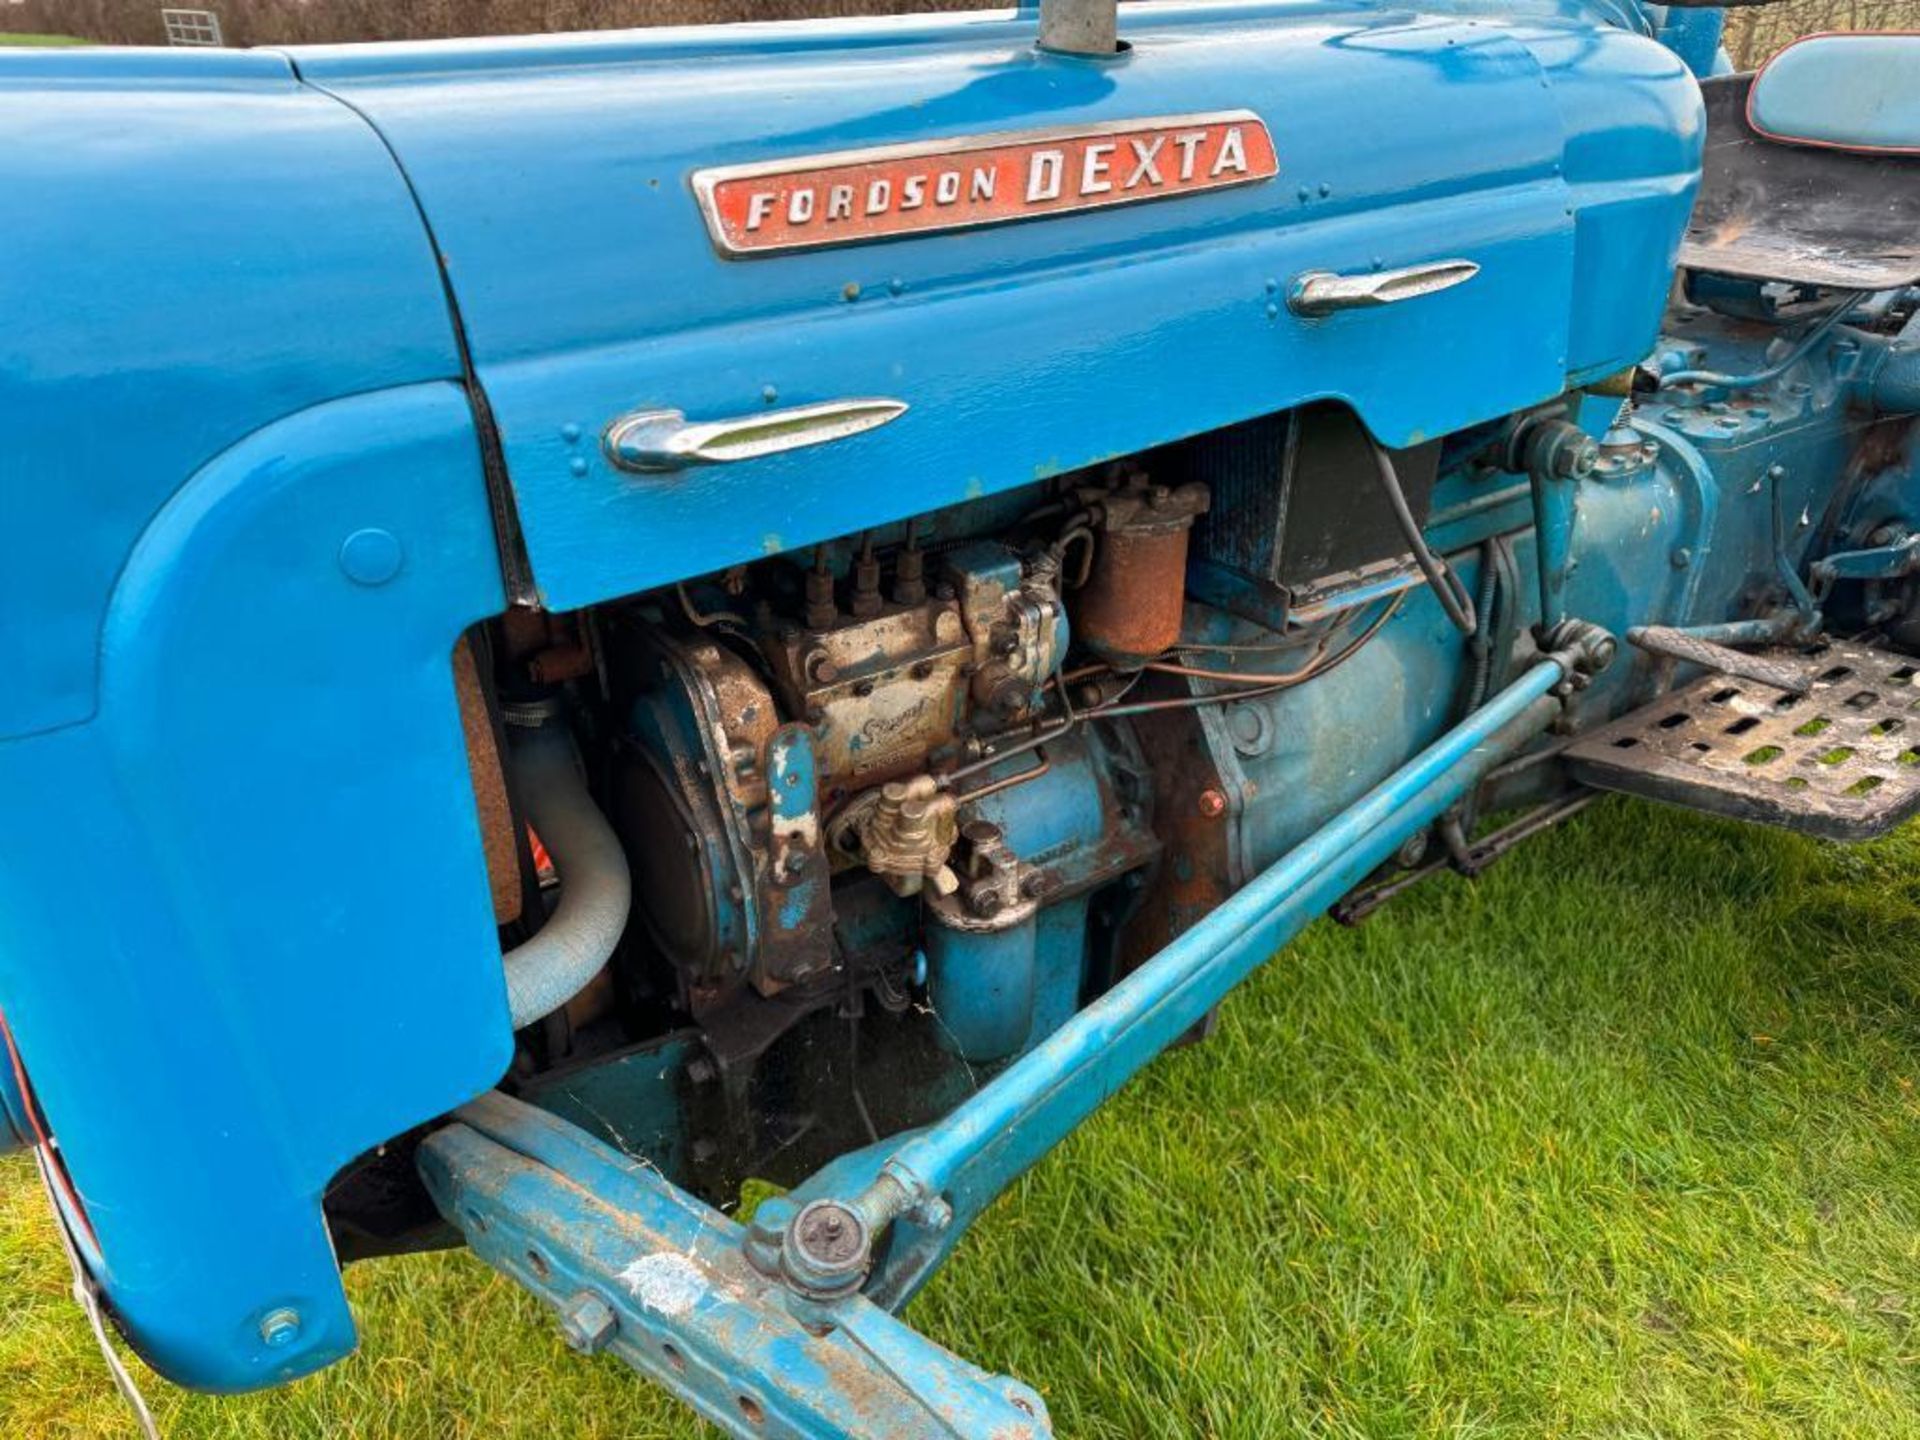 1962 Fordson Dexta 2wd diesel tractor with pick up hitch, rear linkage and rollbar on 12.4/11-28 rea - Bild 4 aus 14